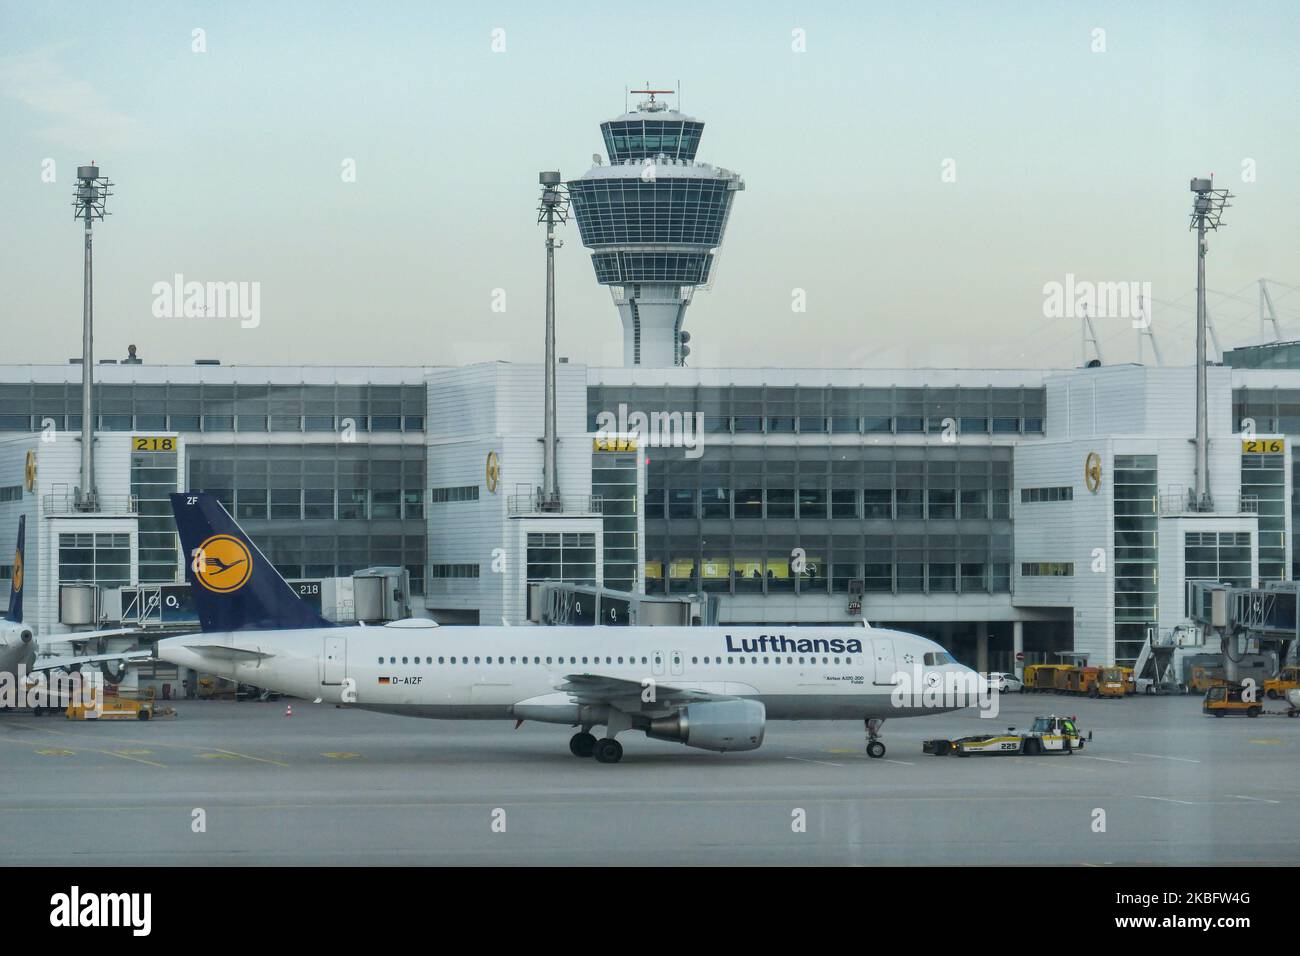 A Lufthansa Airbus A320 with registration D-AIZF in front of the terminal and control tower of Munich Airport. Early morning airplane traffic movement of Lufthansa aircraft with their logo visible on the tarmac and docked via jetbridge or air bridge at the terminal at Munich MUC EDDM international airport in Bavaria, Germany, Flughafen München in German. Deutsche Lufthansa DLH LH is the flag carrier and largest airline in Germany using Munich as one of their two hubs. Lufthansa is a Star Alliance aviation alliance member. January 26, 2020 (Photo by Nicolas Economou/NurPhoto) Stock Photo